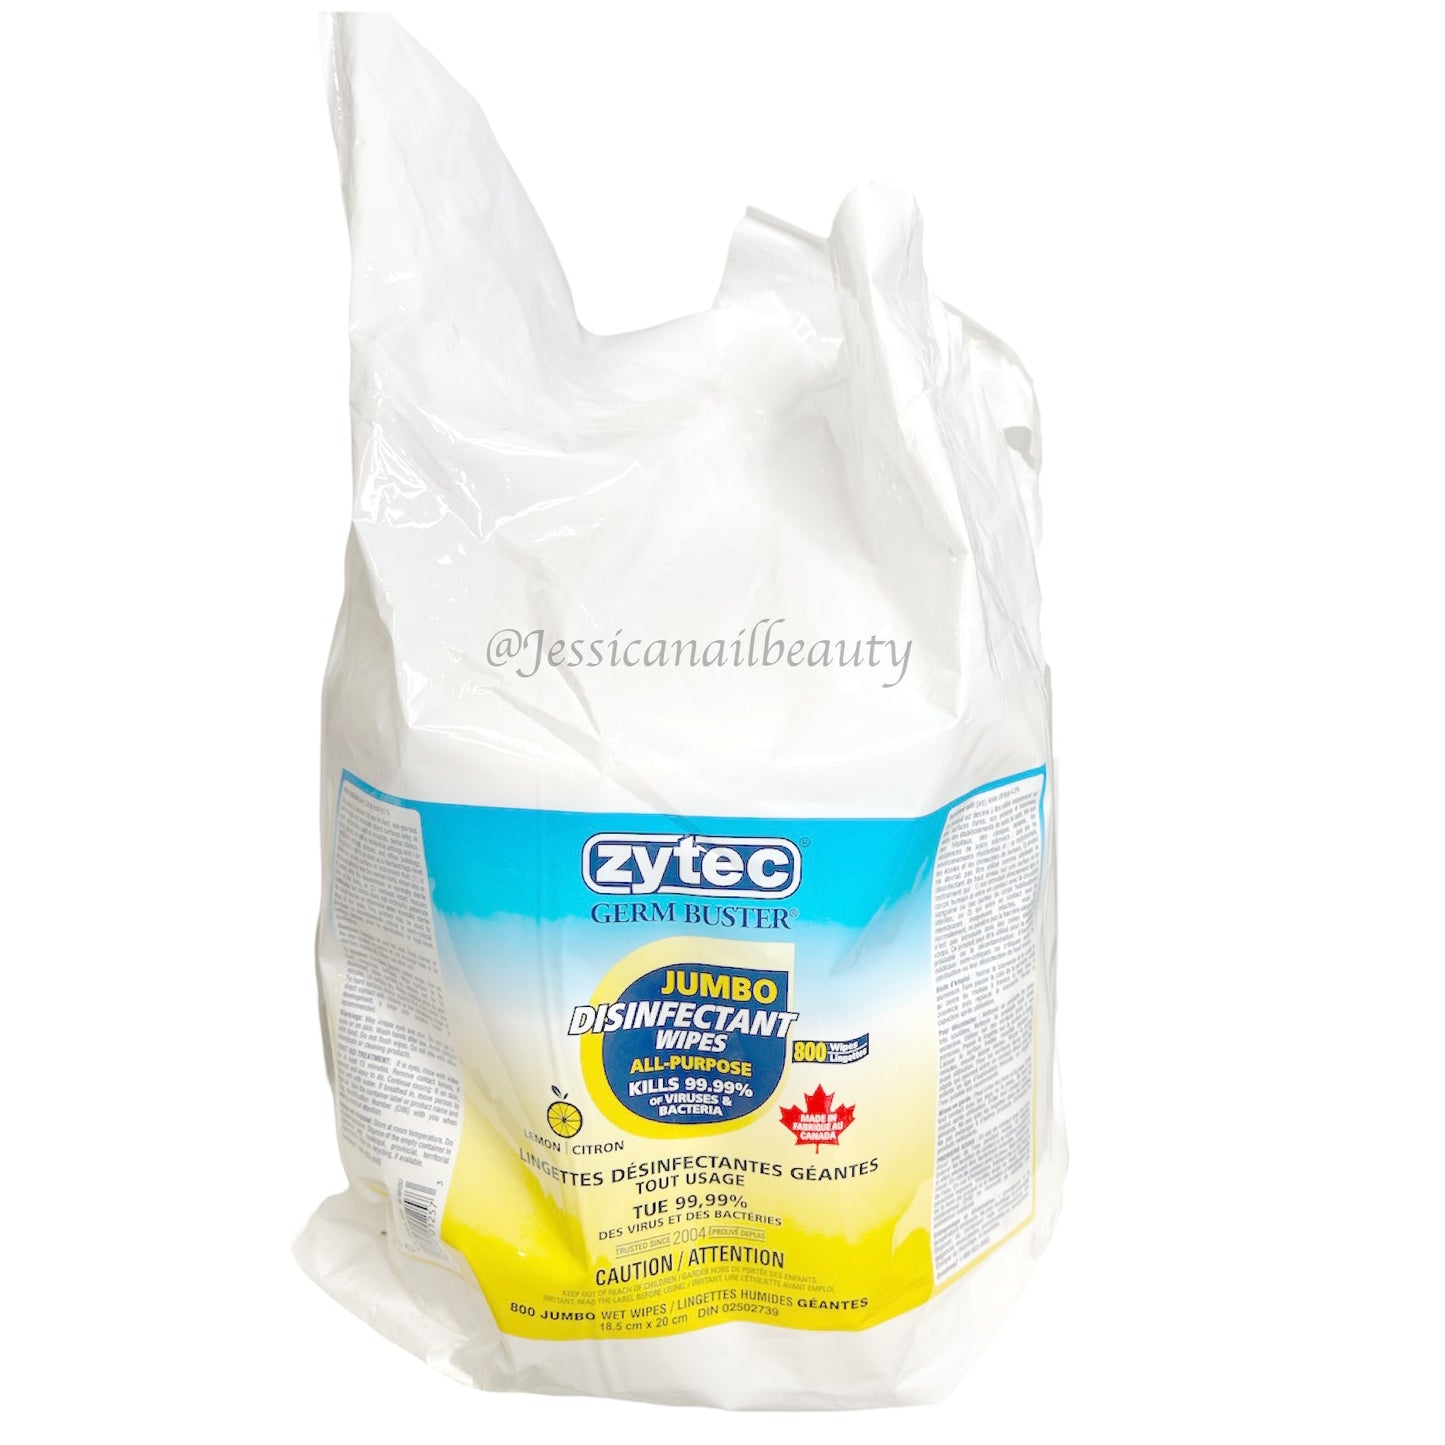 Jumbo Non-woven Dry Disinfectant Wipes Refill Rolls (800 wipes)